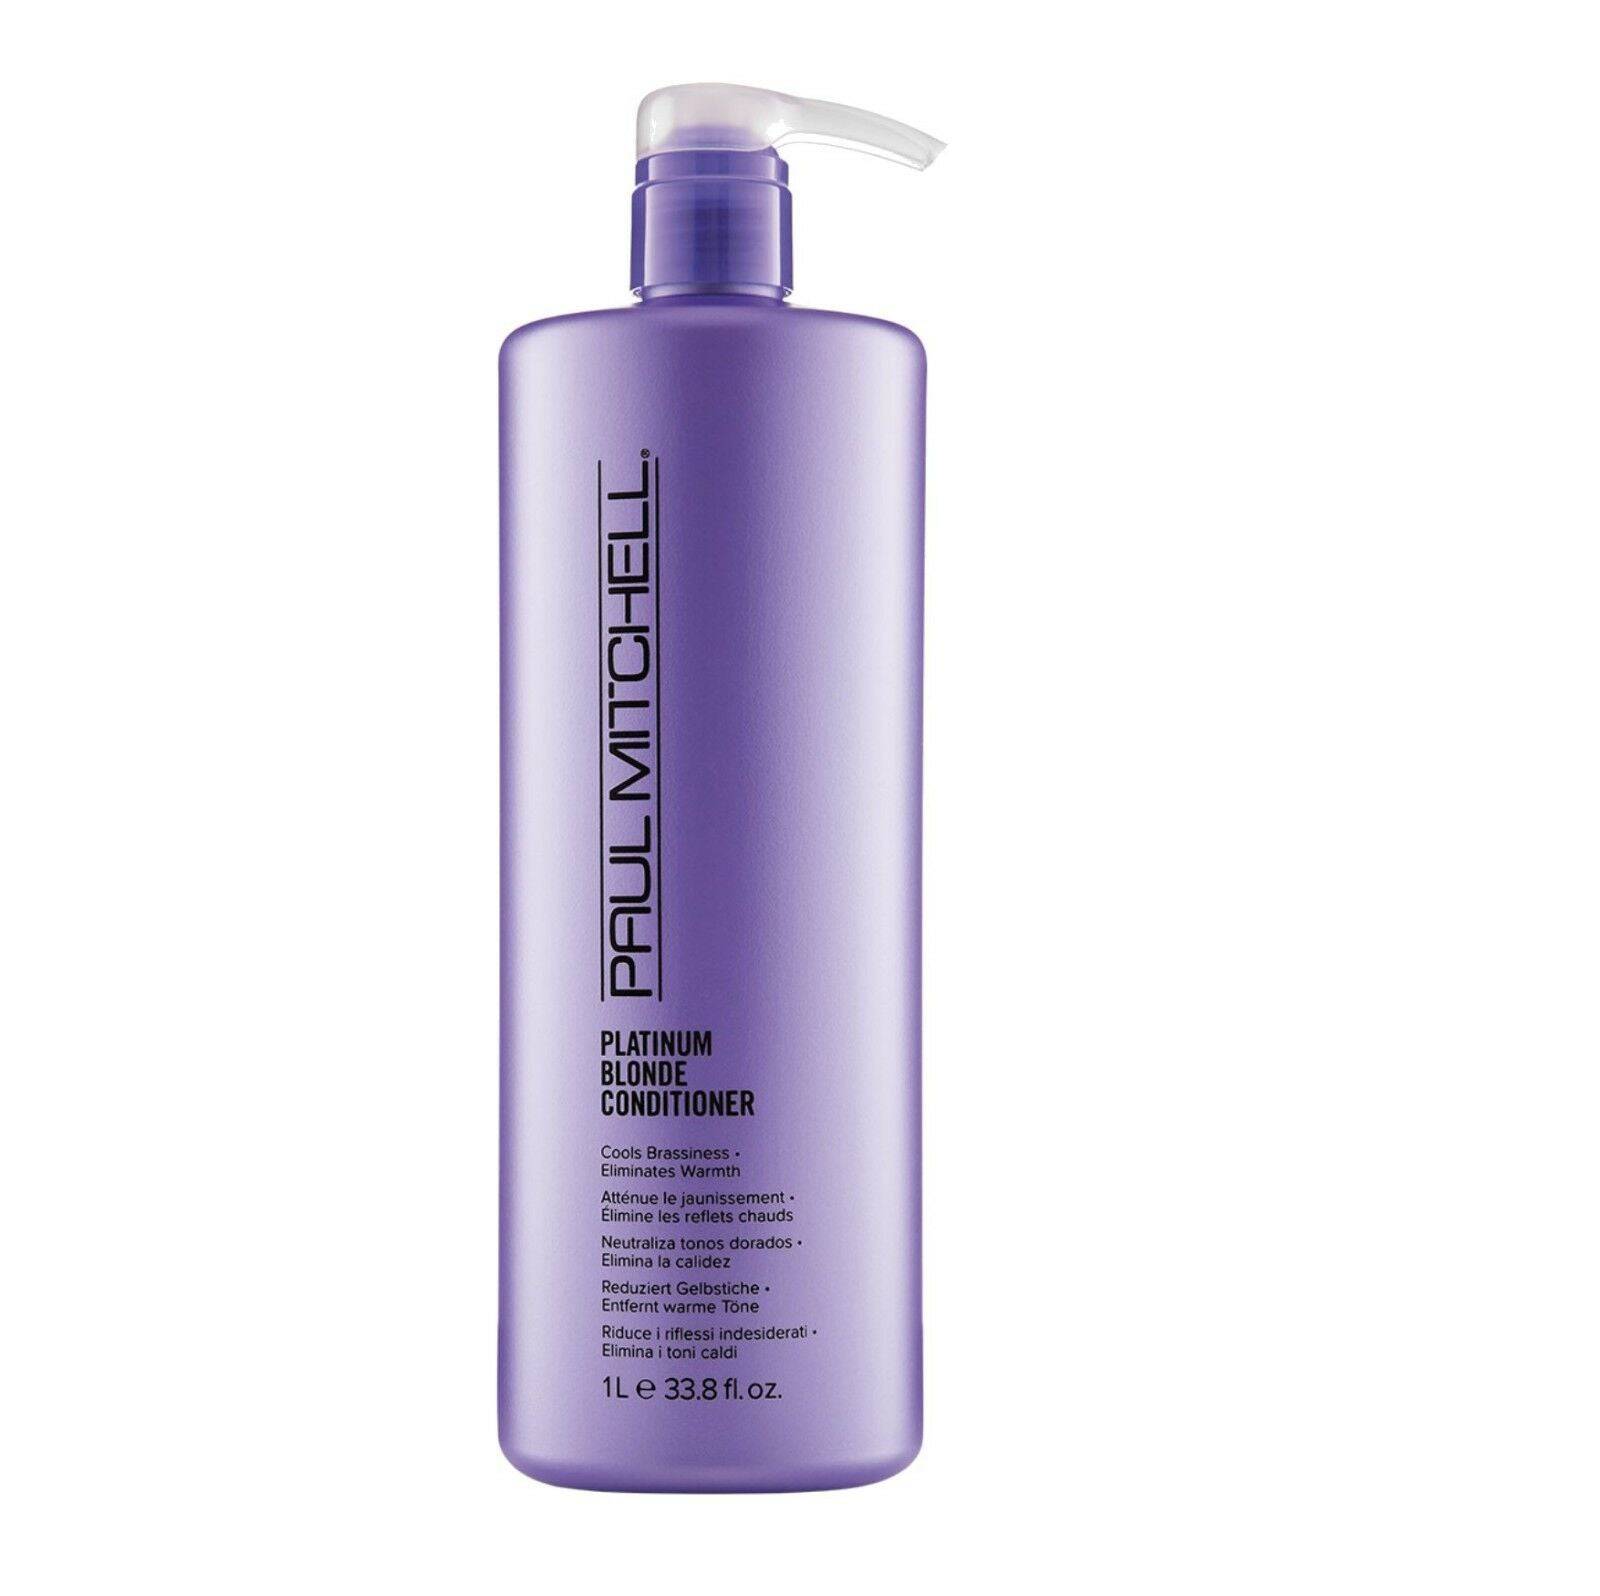 Paul Mitchell Platinum Blonde Shampoo and Conditioner 1lt Duo - On Line Hair Depot